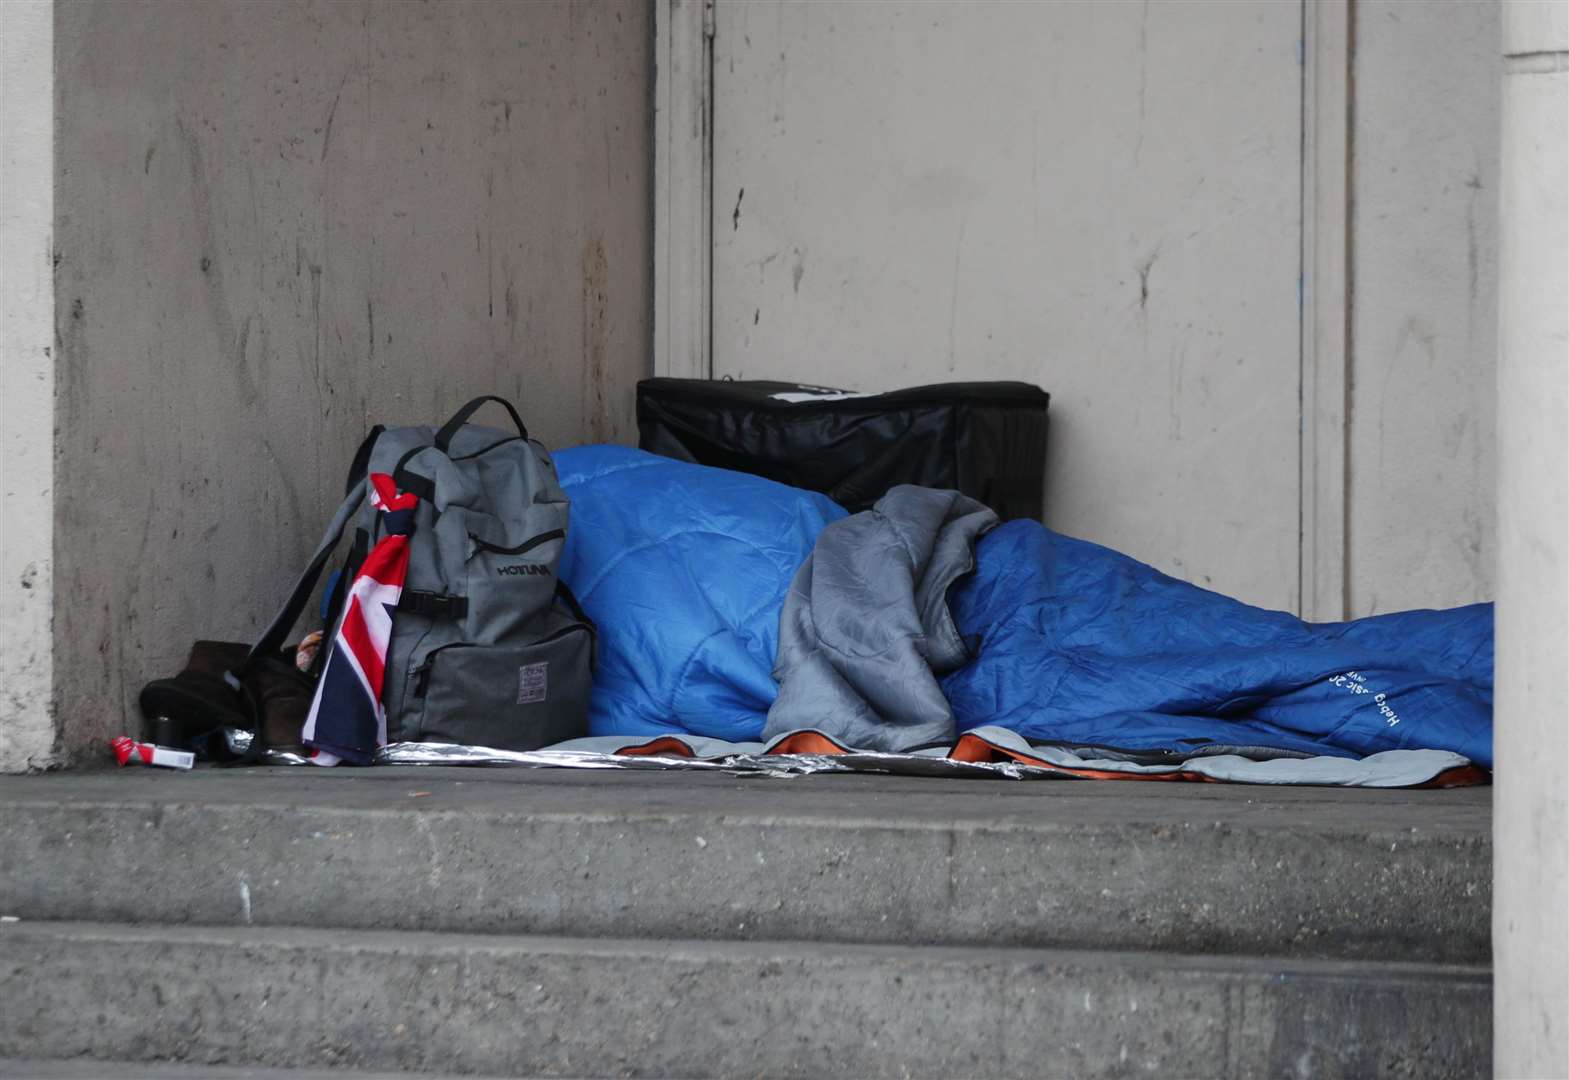 People who have never been at risk of homelessness before are now sleeping rough, a charity said (Yui Mok/PA)